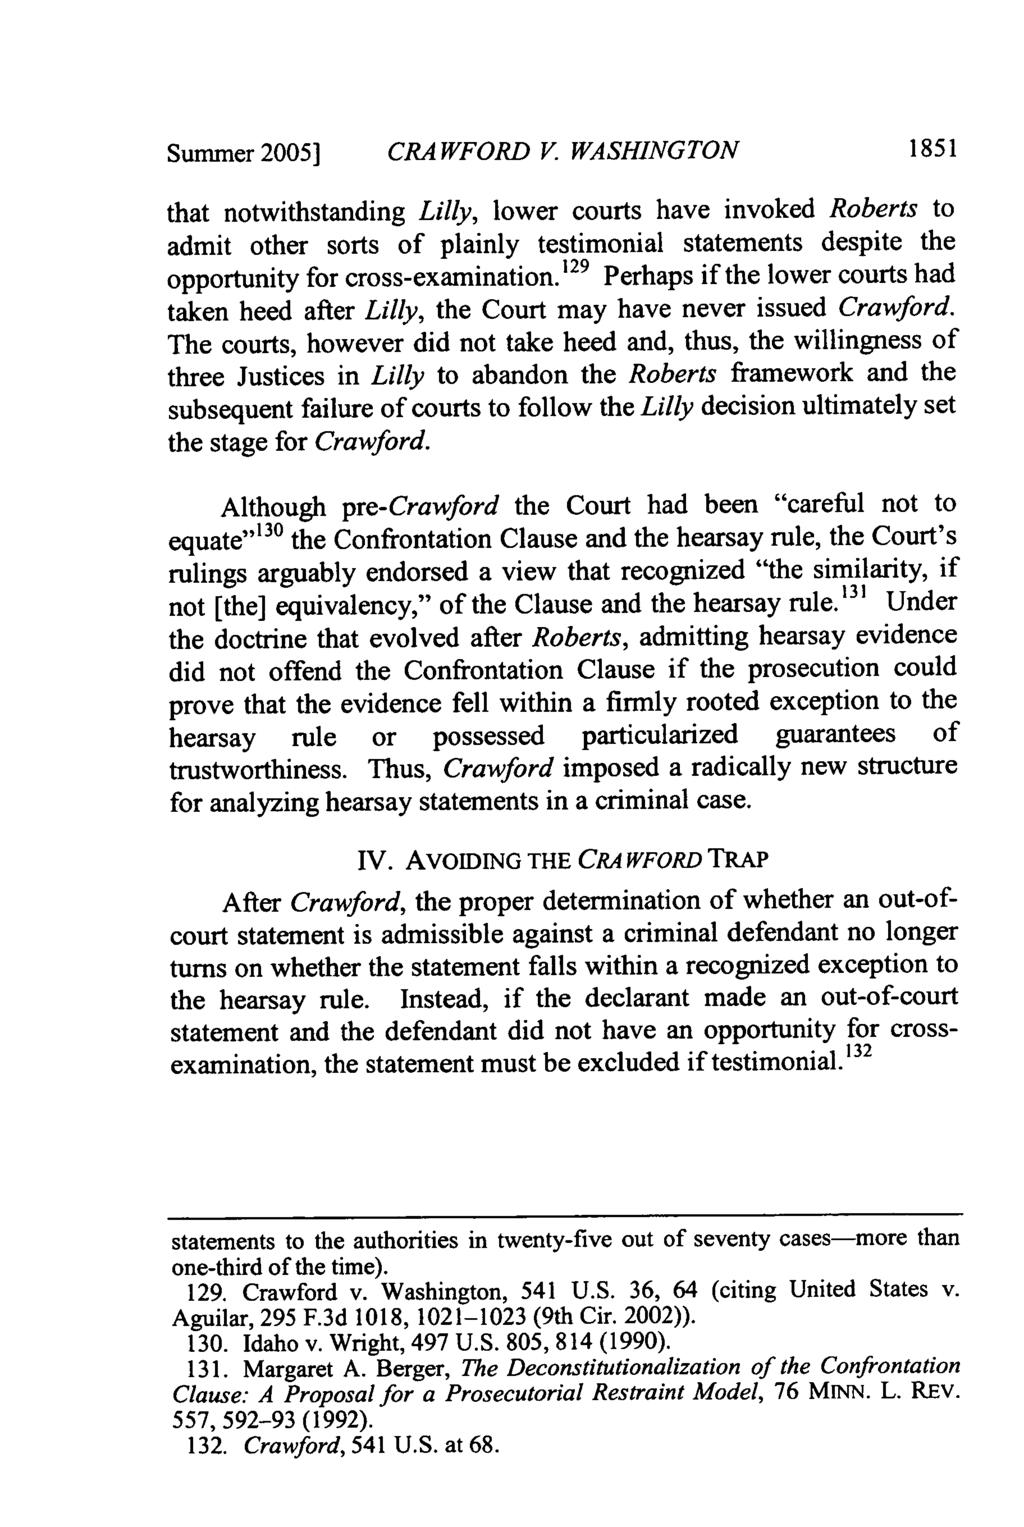 Sumnmer 2005] CRA WFORD V WASHINGTON 1851 that notwithstanding Lilly, lower courts have invoked Roberts to admit other sorts of plainly testimonial statements despite the opportunity for